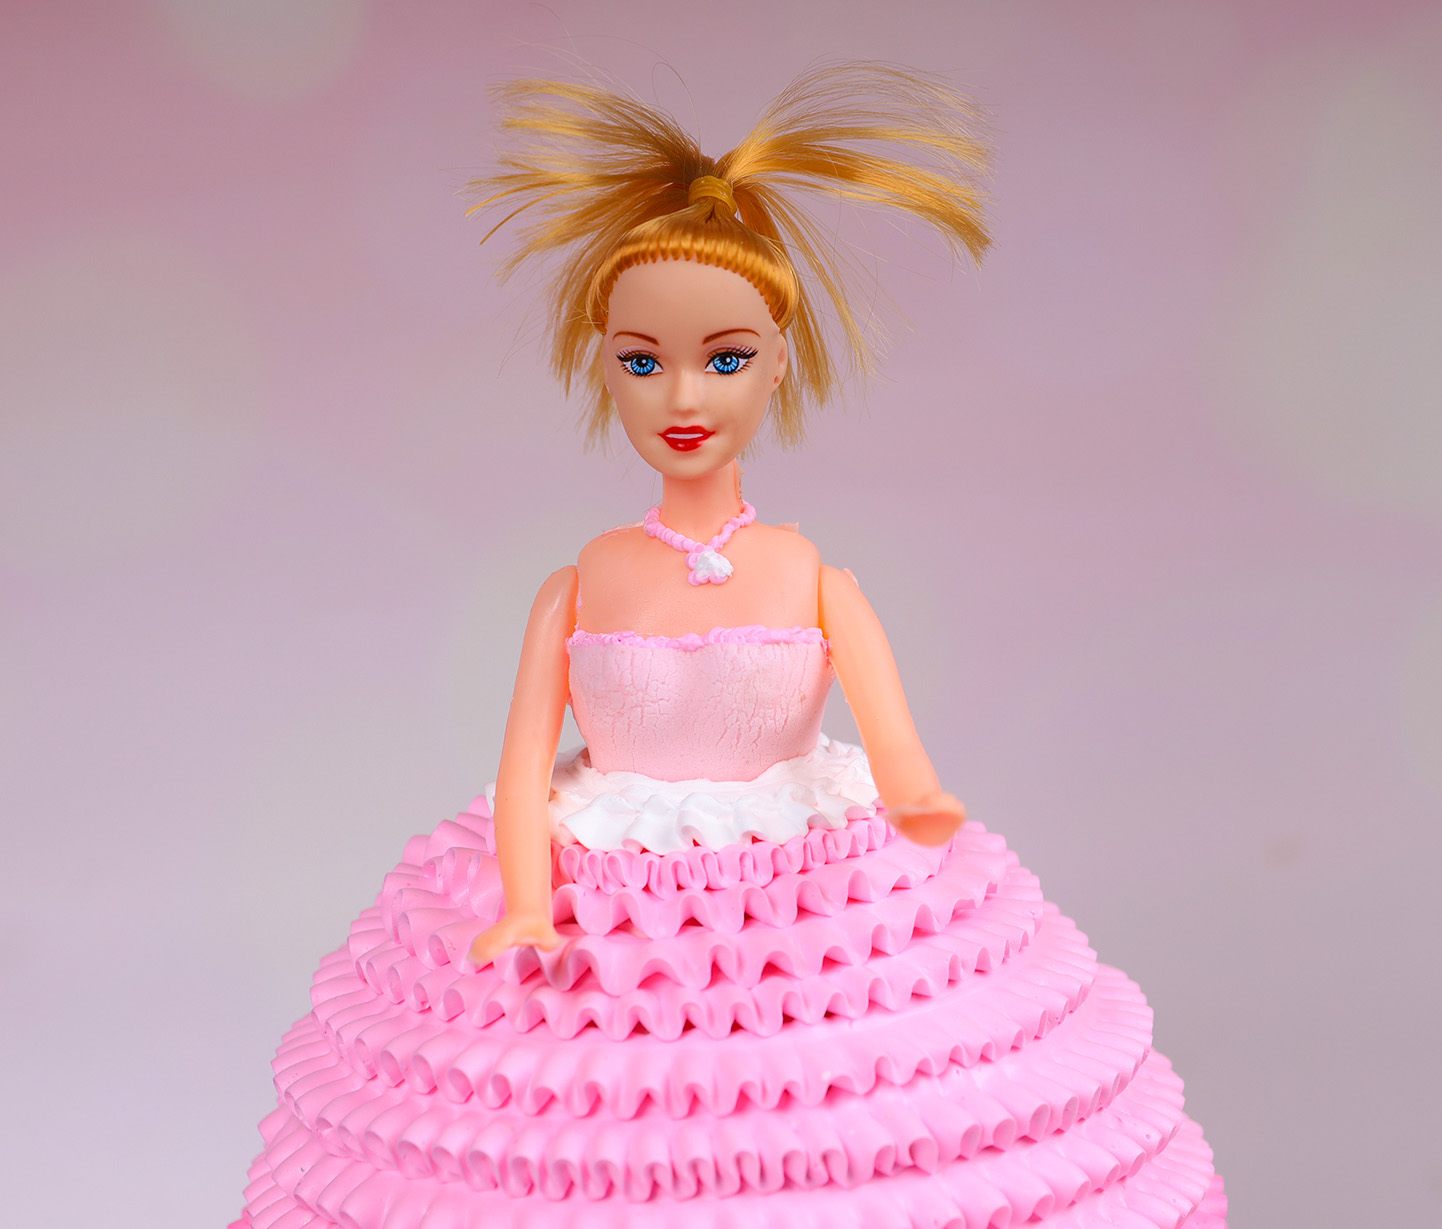 Discover 140+ barbie cake designs ideas best - awesomeenglish.edu.vn